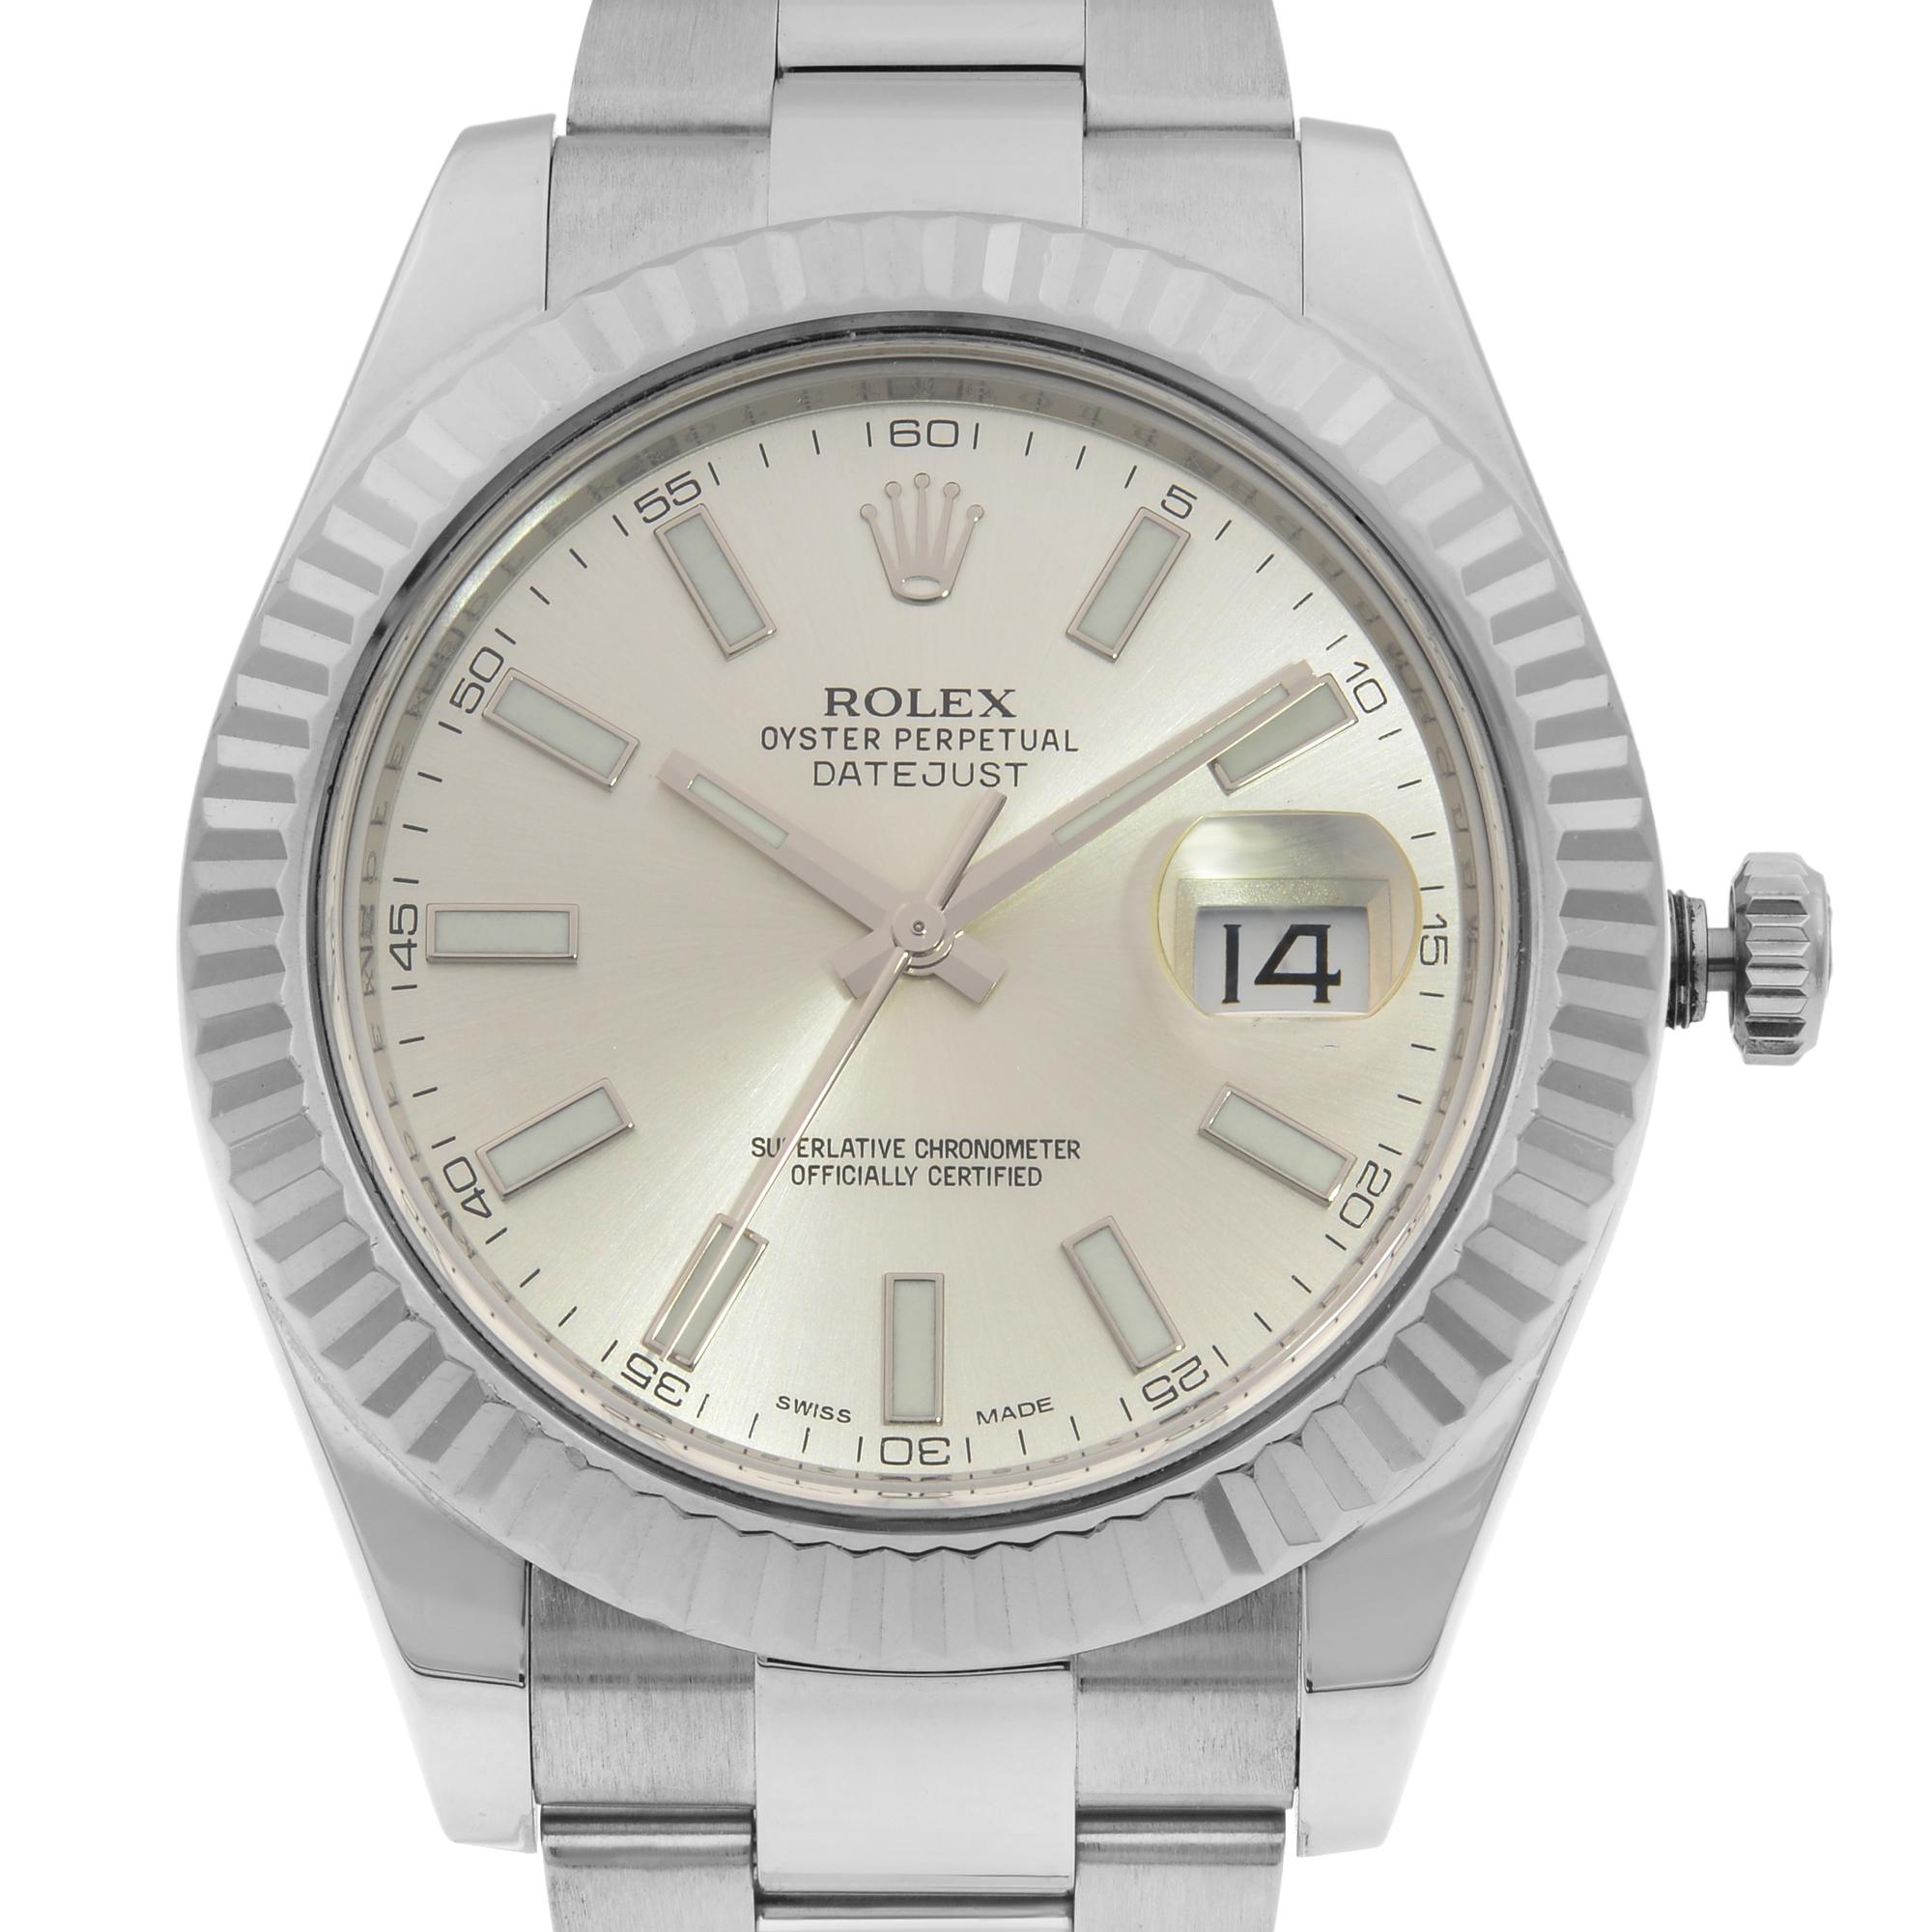 This pre-owned Rolex Datejust II 116334  is a beautiful men's timepiece that is powered by mechanical (automatic) movement which is cased in a stainless steel case. It has a round shape face, date indicator dial and has hand sticks style markers. It